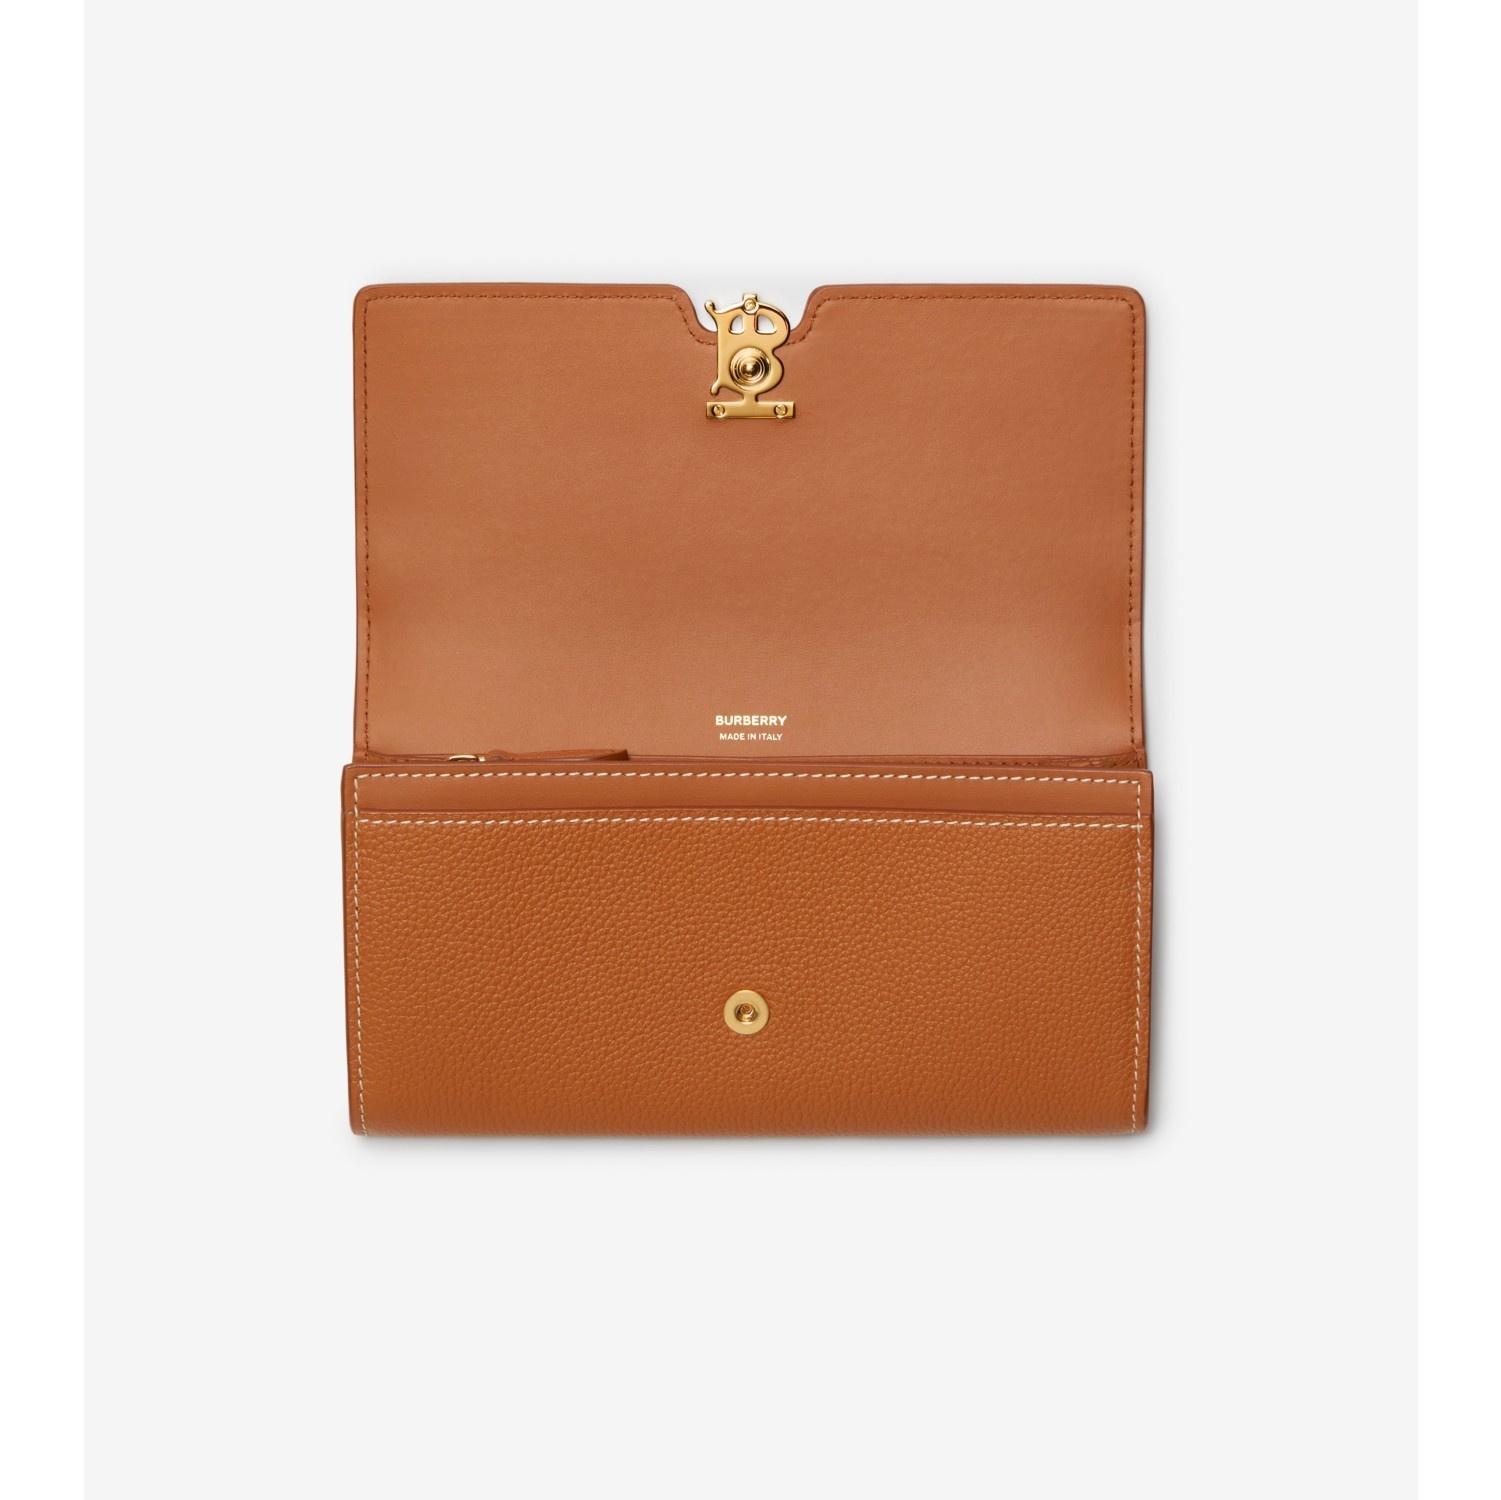 Grainy Leather TB Continental Wallet in Warm russet brown - Women | Burberry® Official